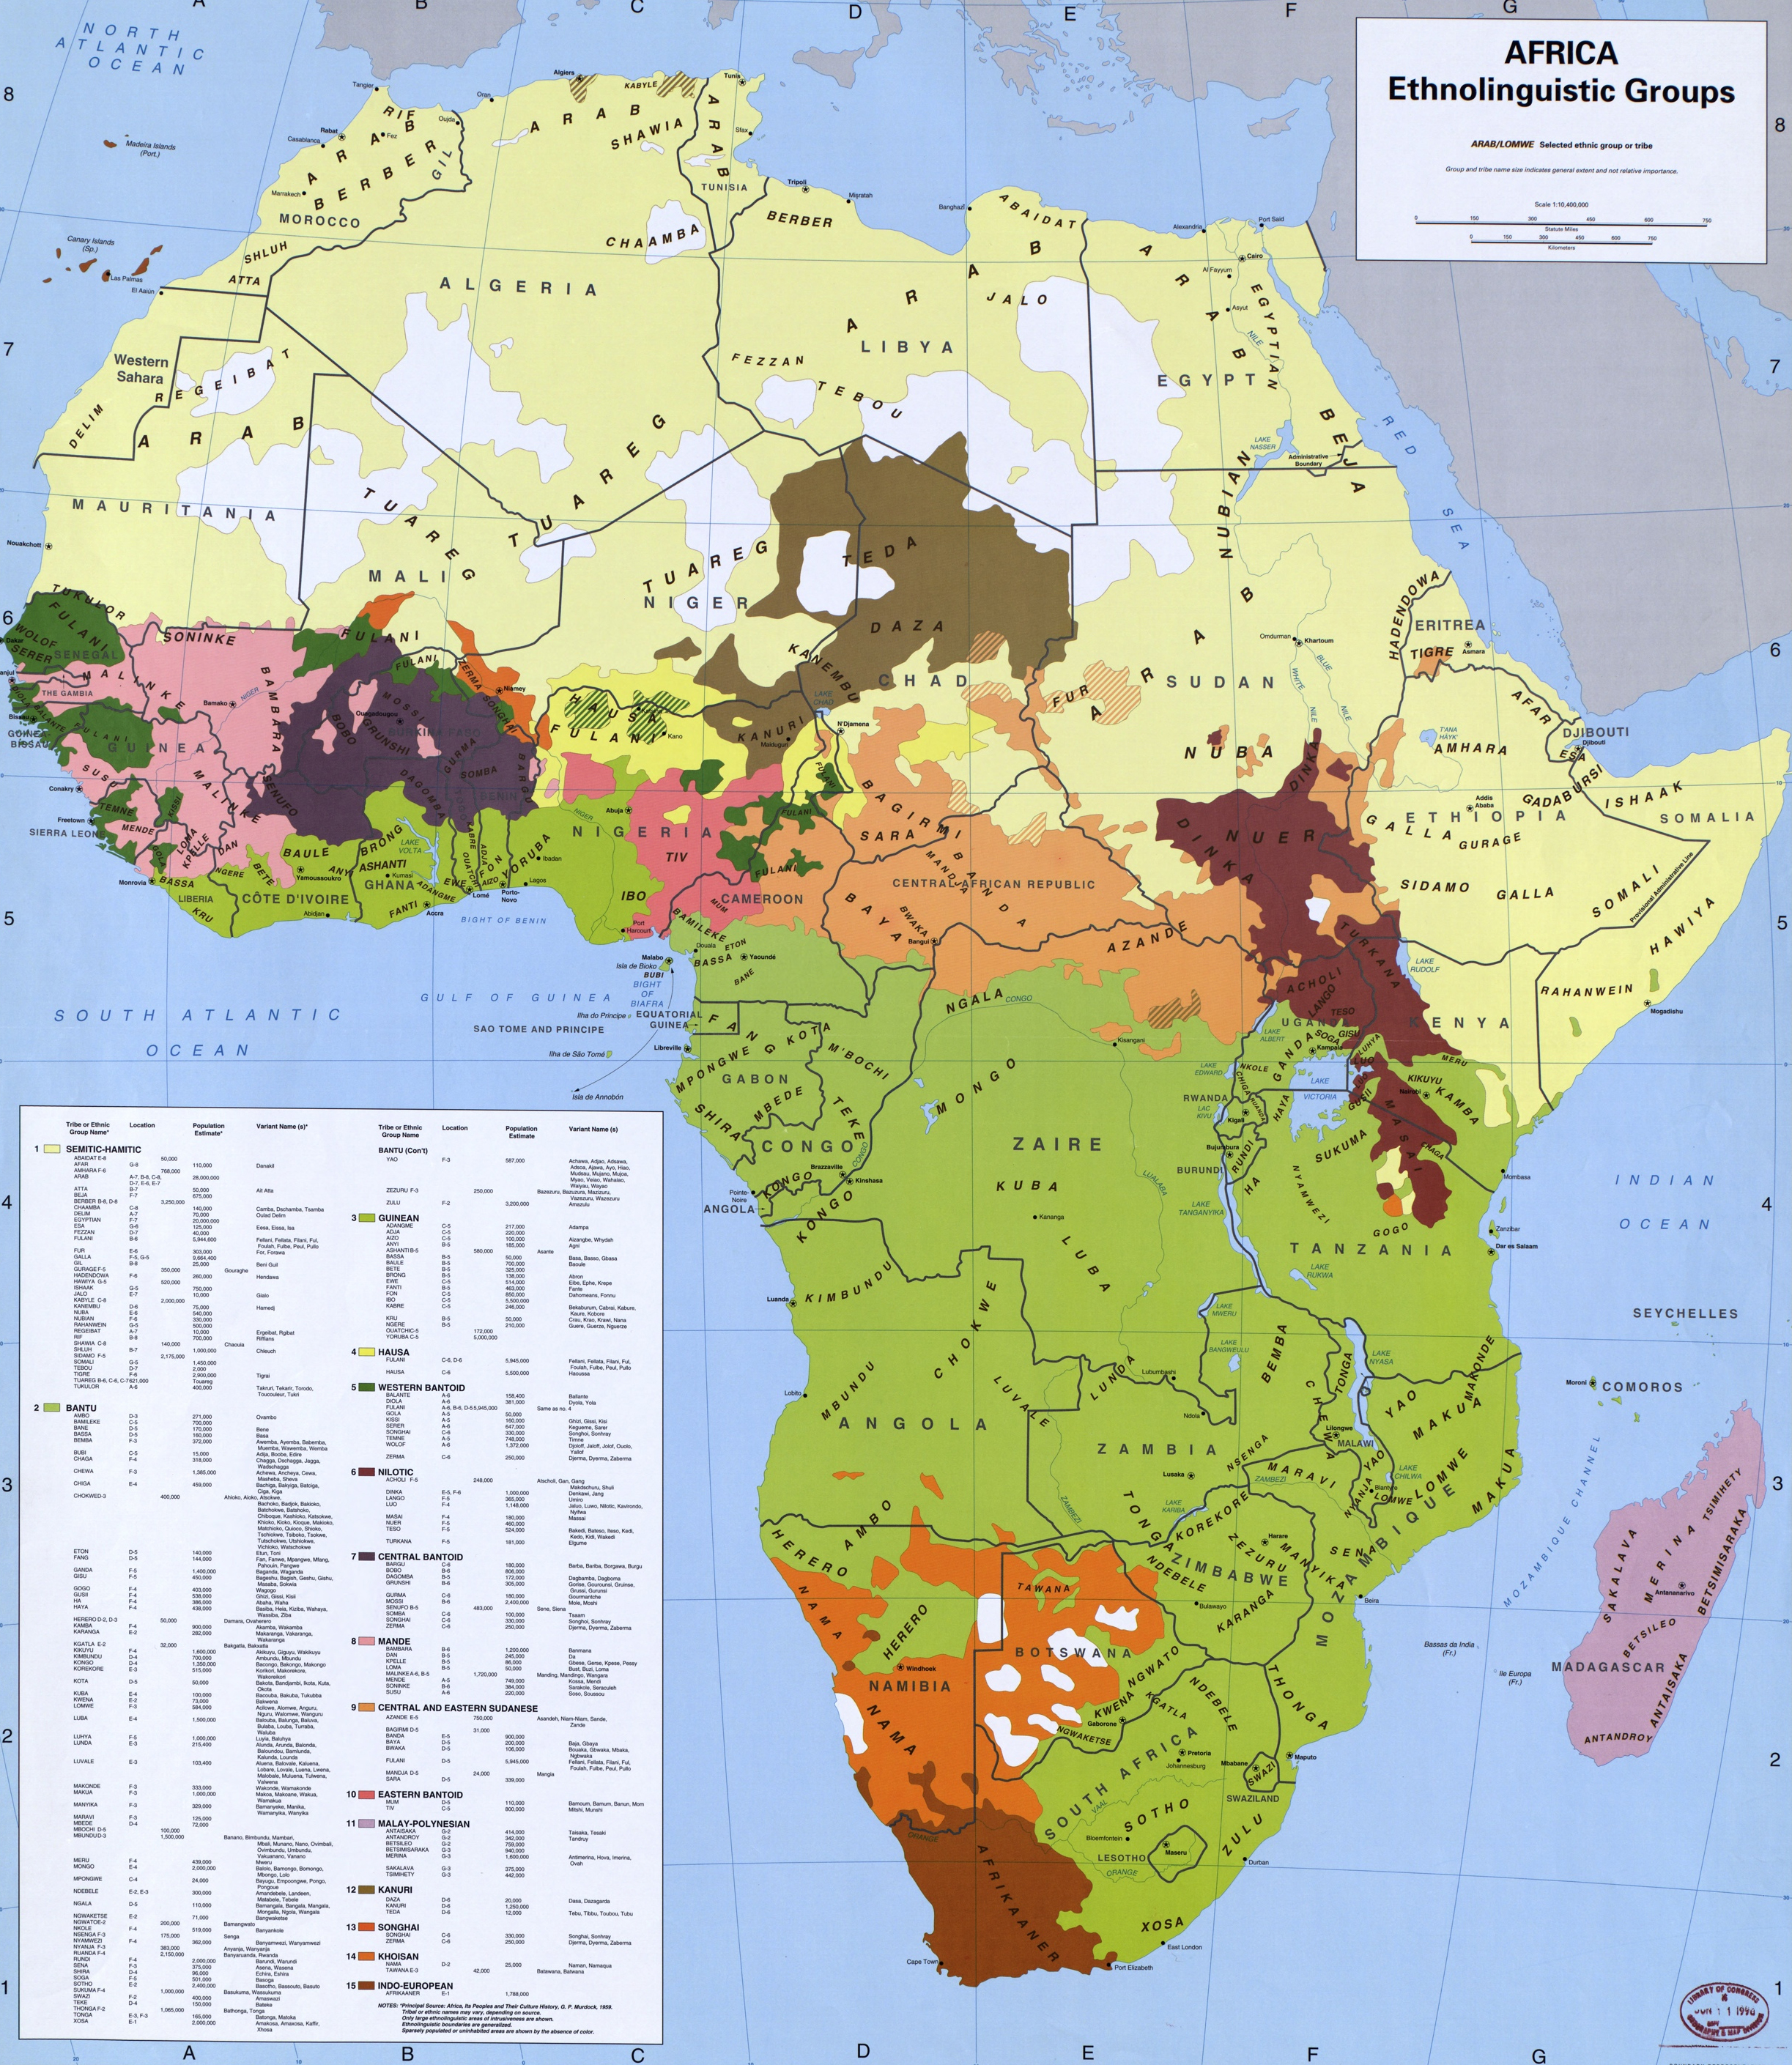 George Murdock's map of the Ethnolinguistic groups of Africa